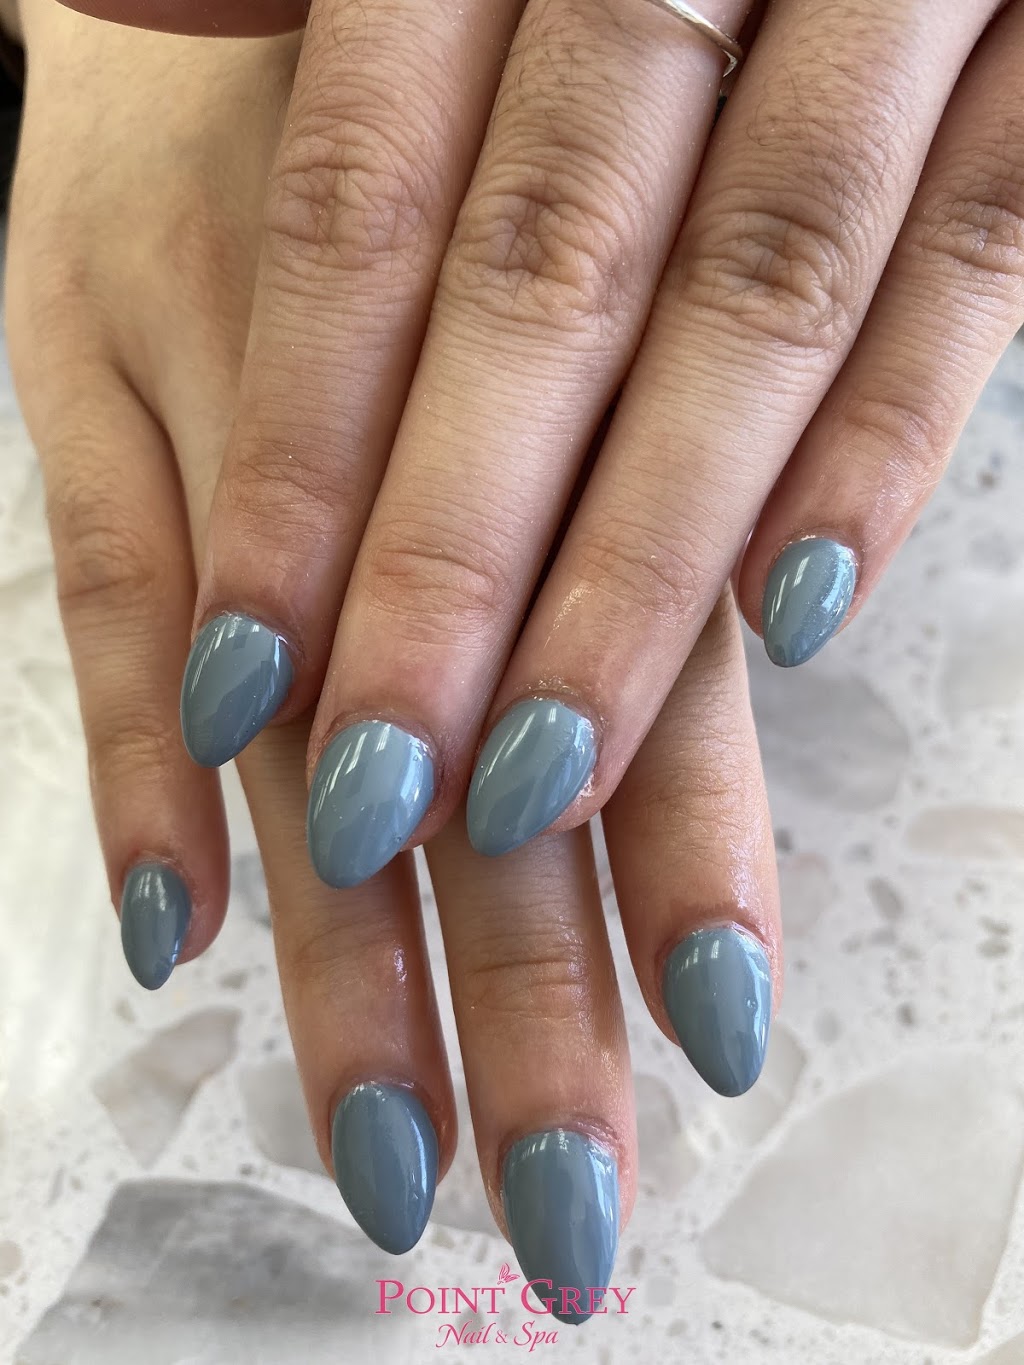 POINT GREY Nail & Spa | hair care | 2951 4th Ave #2, Vancouver, BC V6K 1R3, Canada | 6046769651 OR +1 604-676-9651